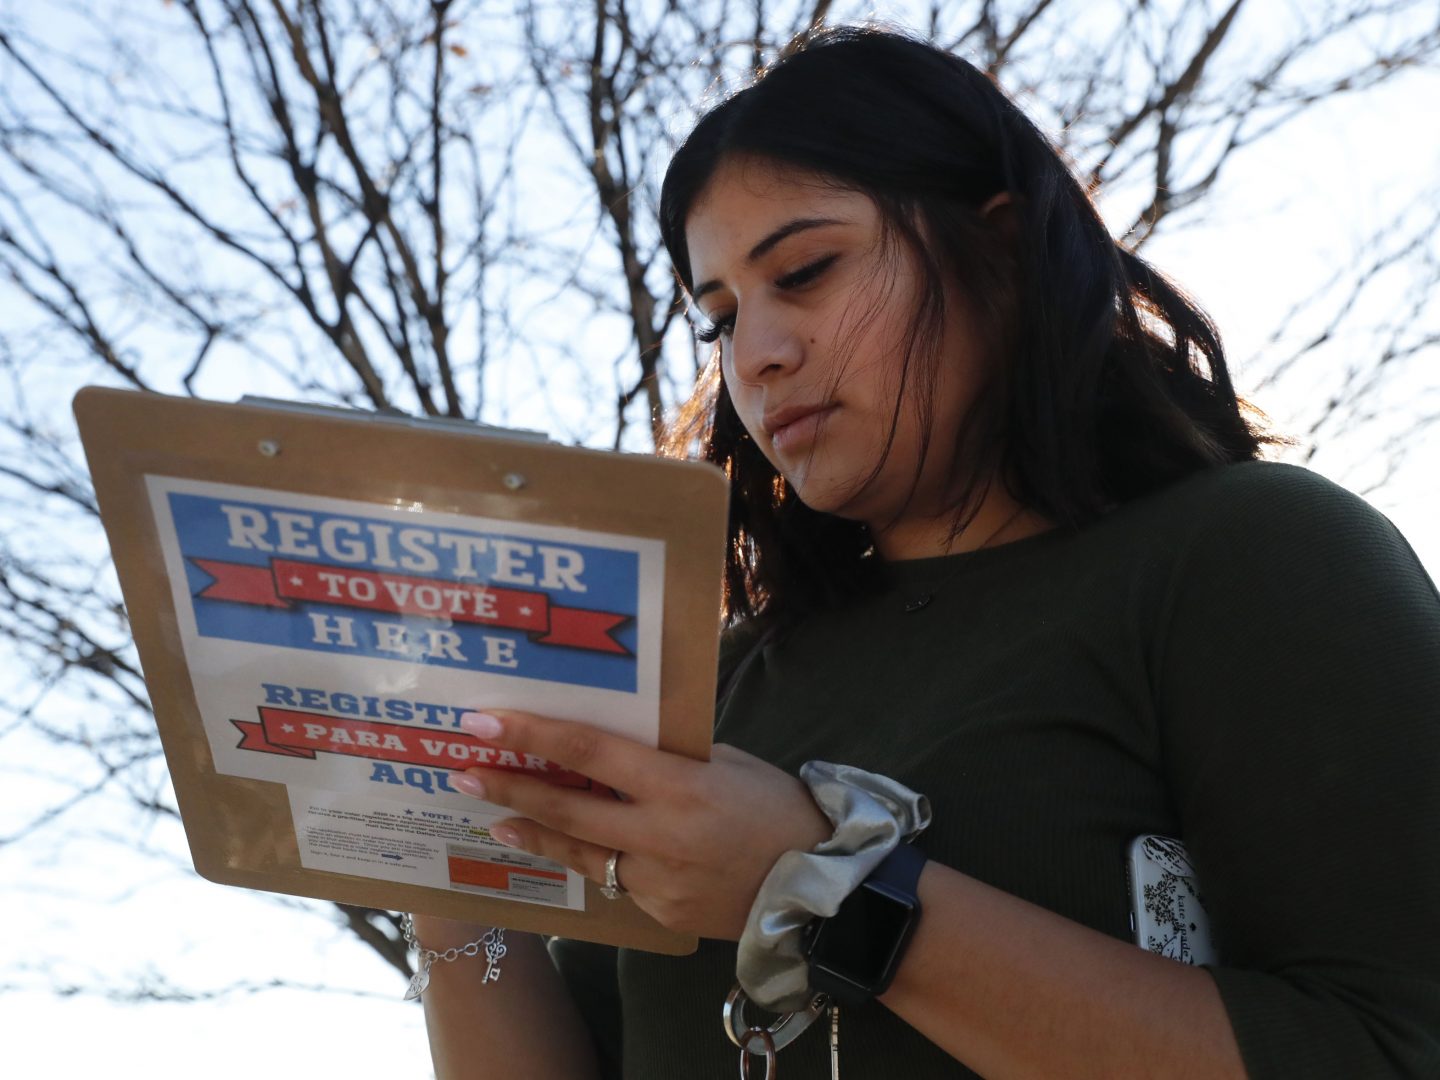 Karina Shumate, 21, a college student, filled out a voter registration form in Richardson, Texas on Jan. 18. One big registration effort this year has drawn controversy among elections officials.